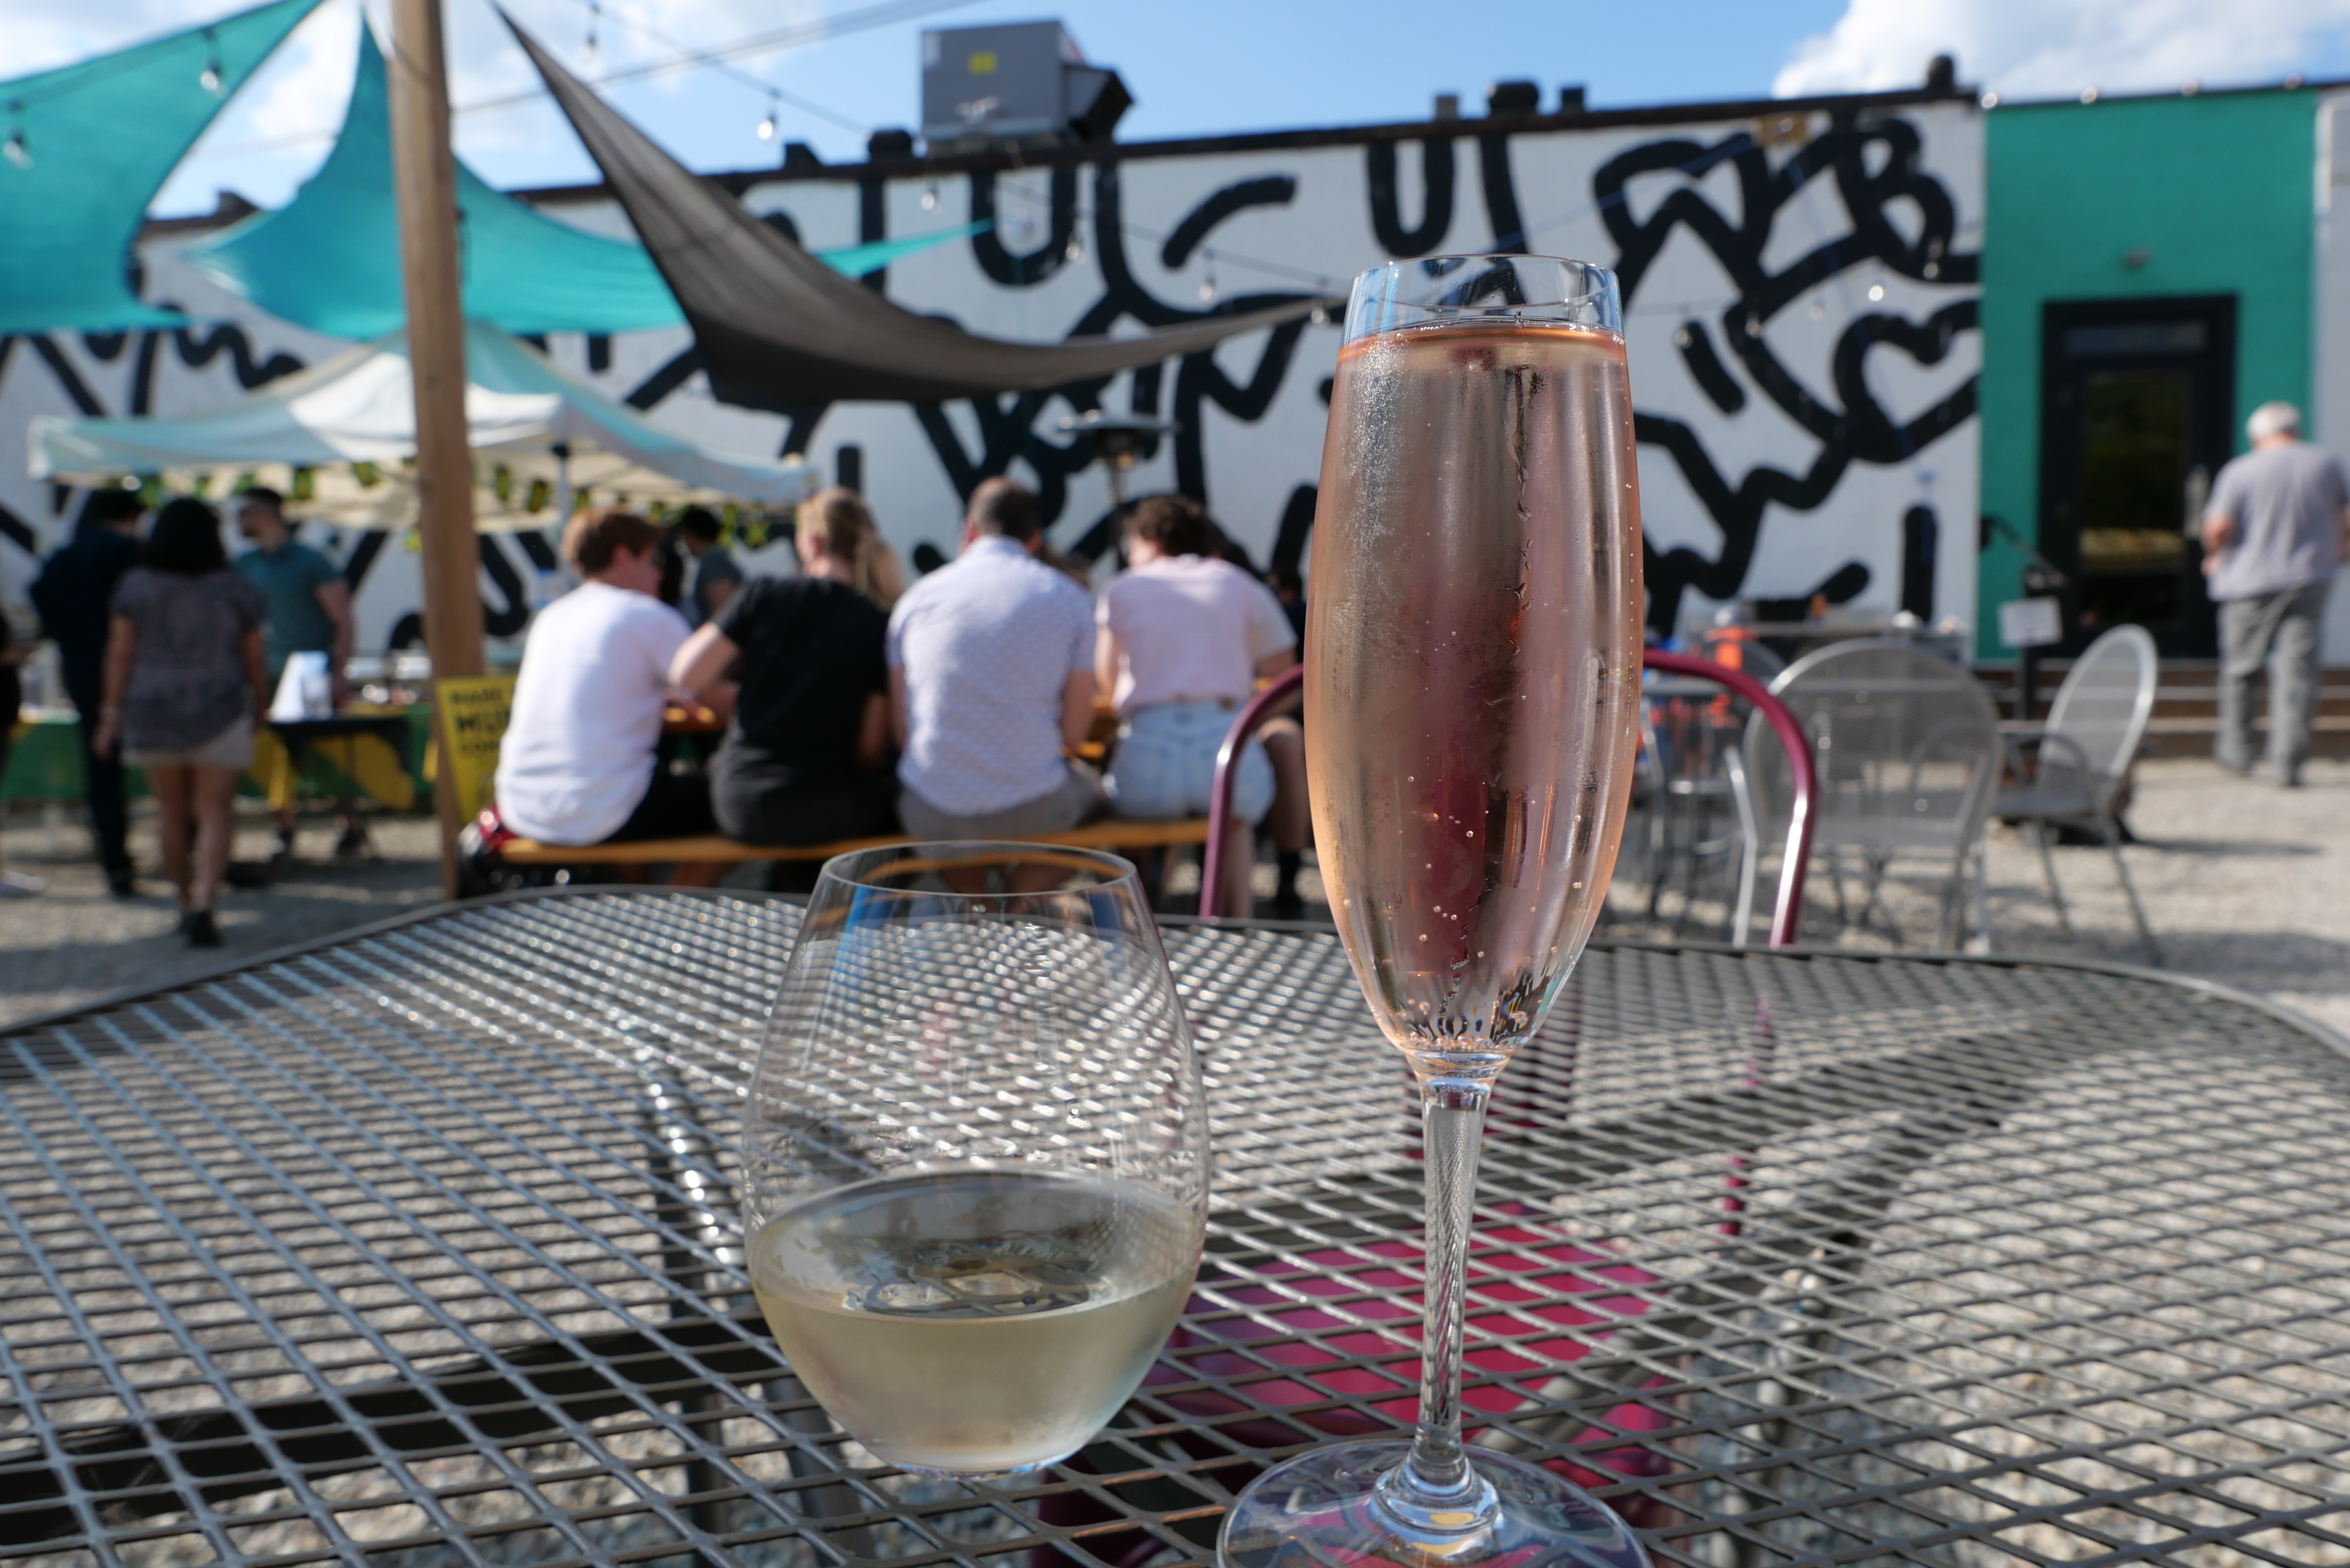 Two glasses of wine, one white and one rose, sit on a metal table outside on a sunlit patio dotted with people congregating at other tables.